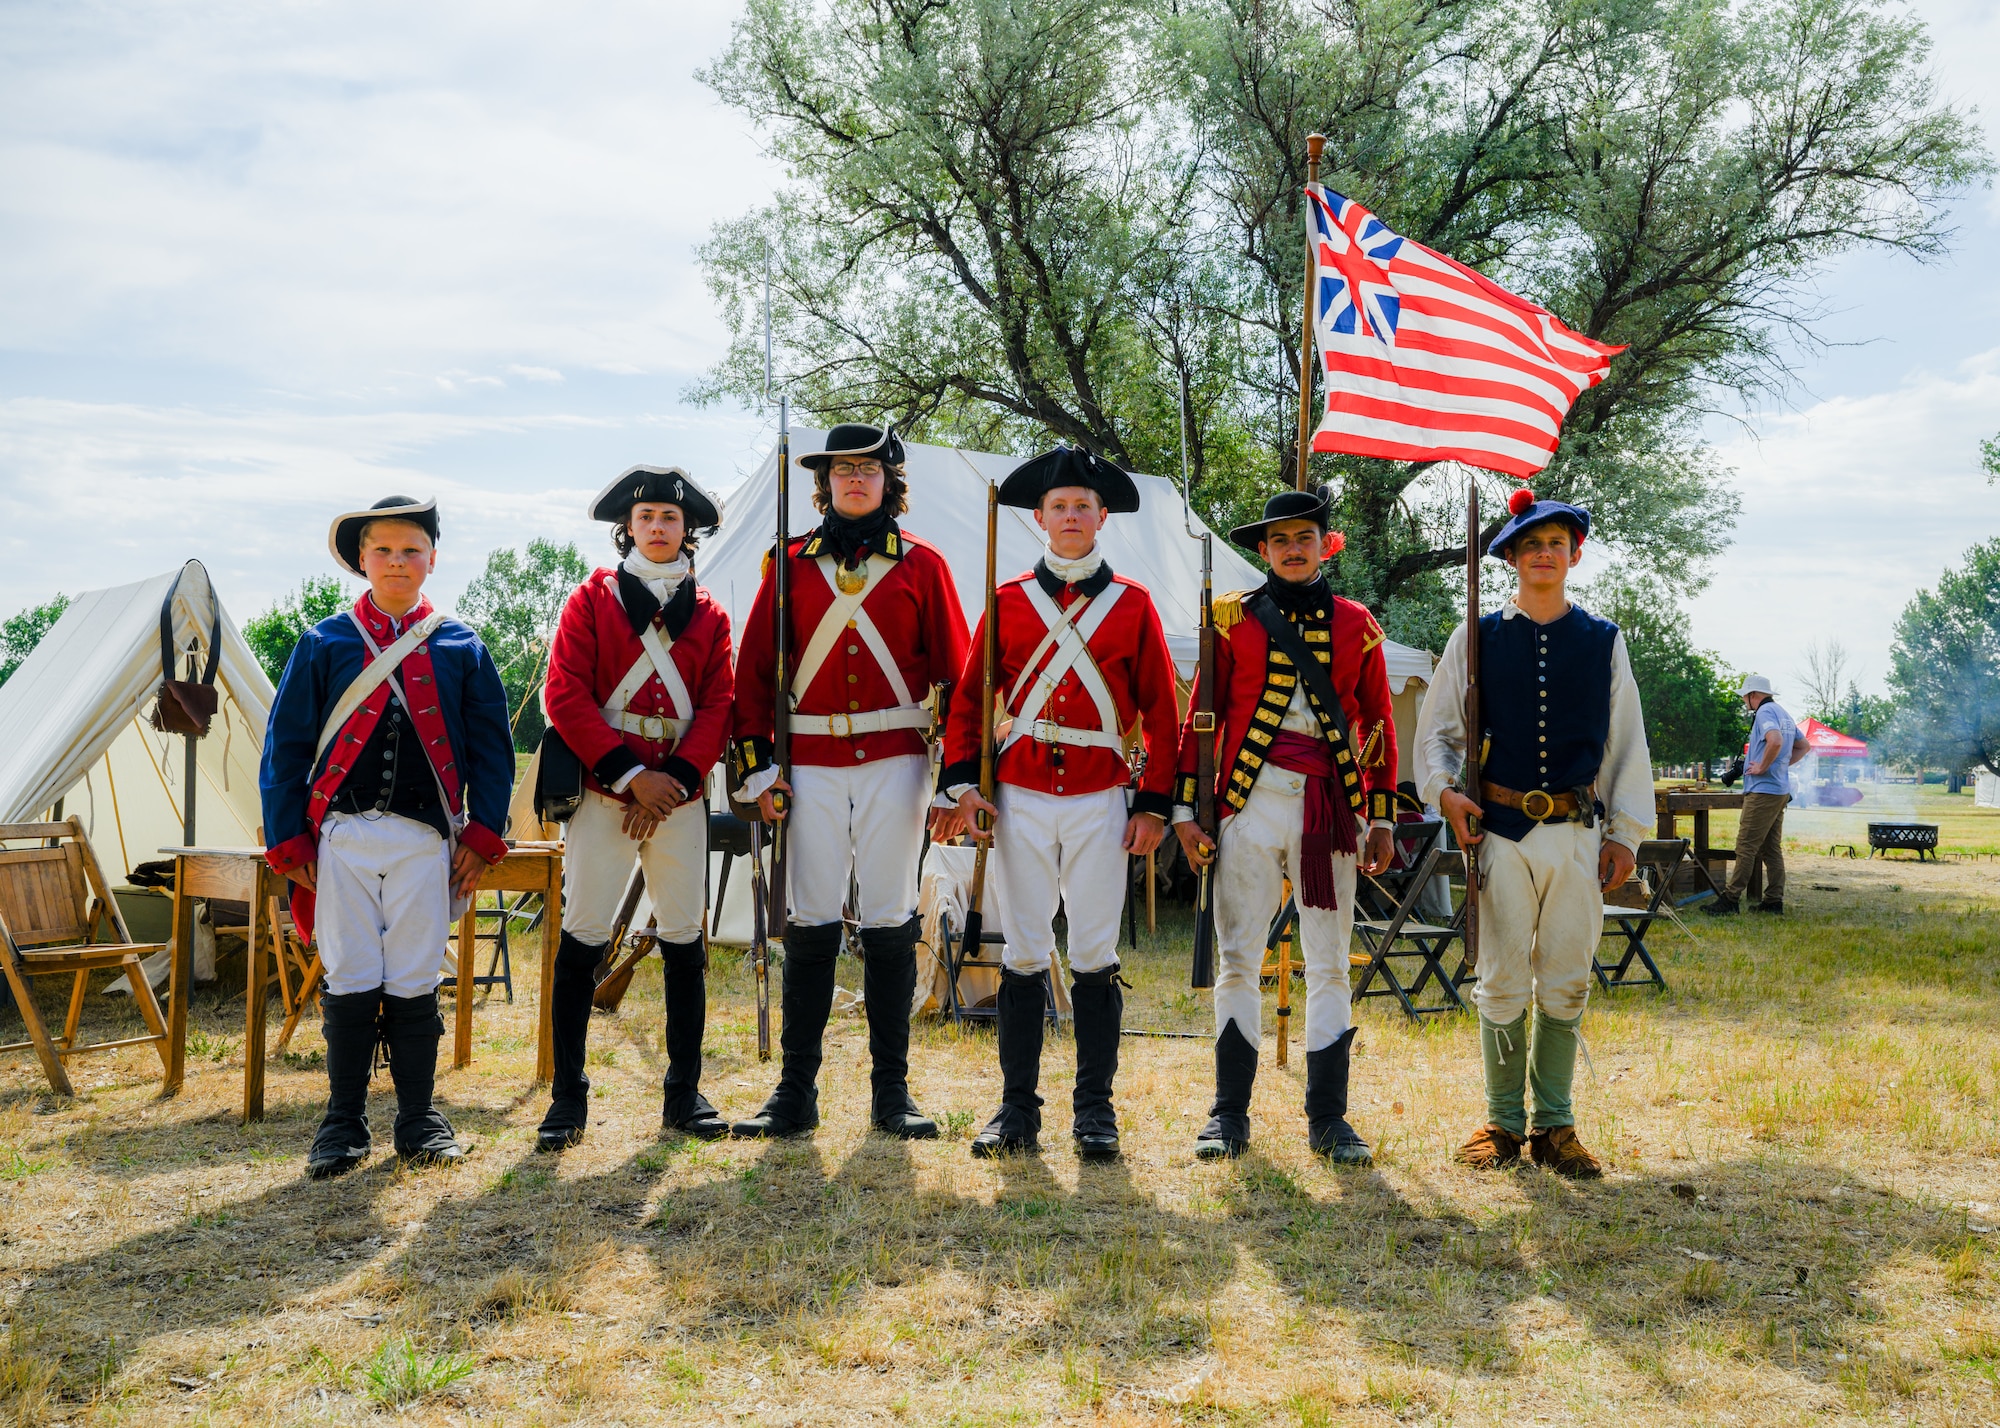 Historical reenactors pose for a photo.